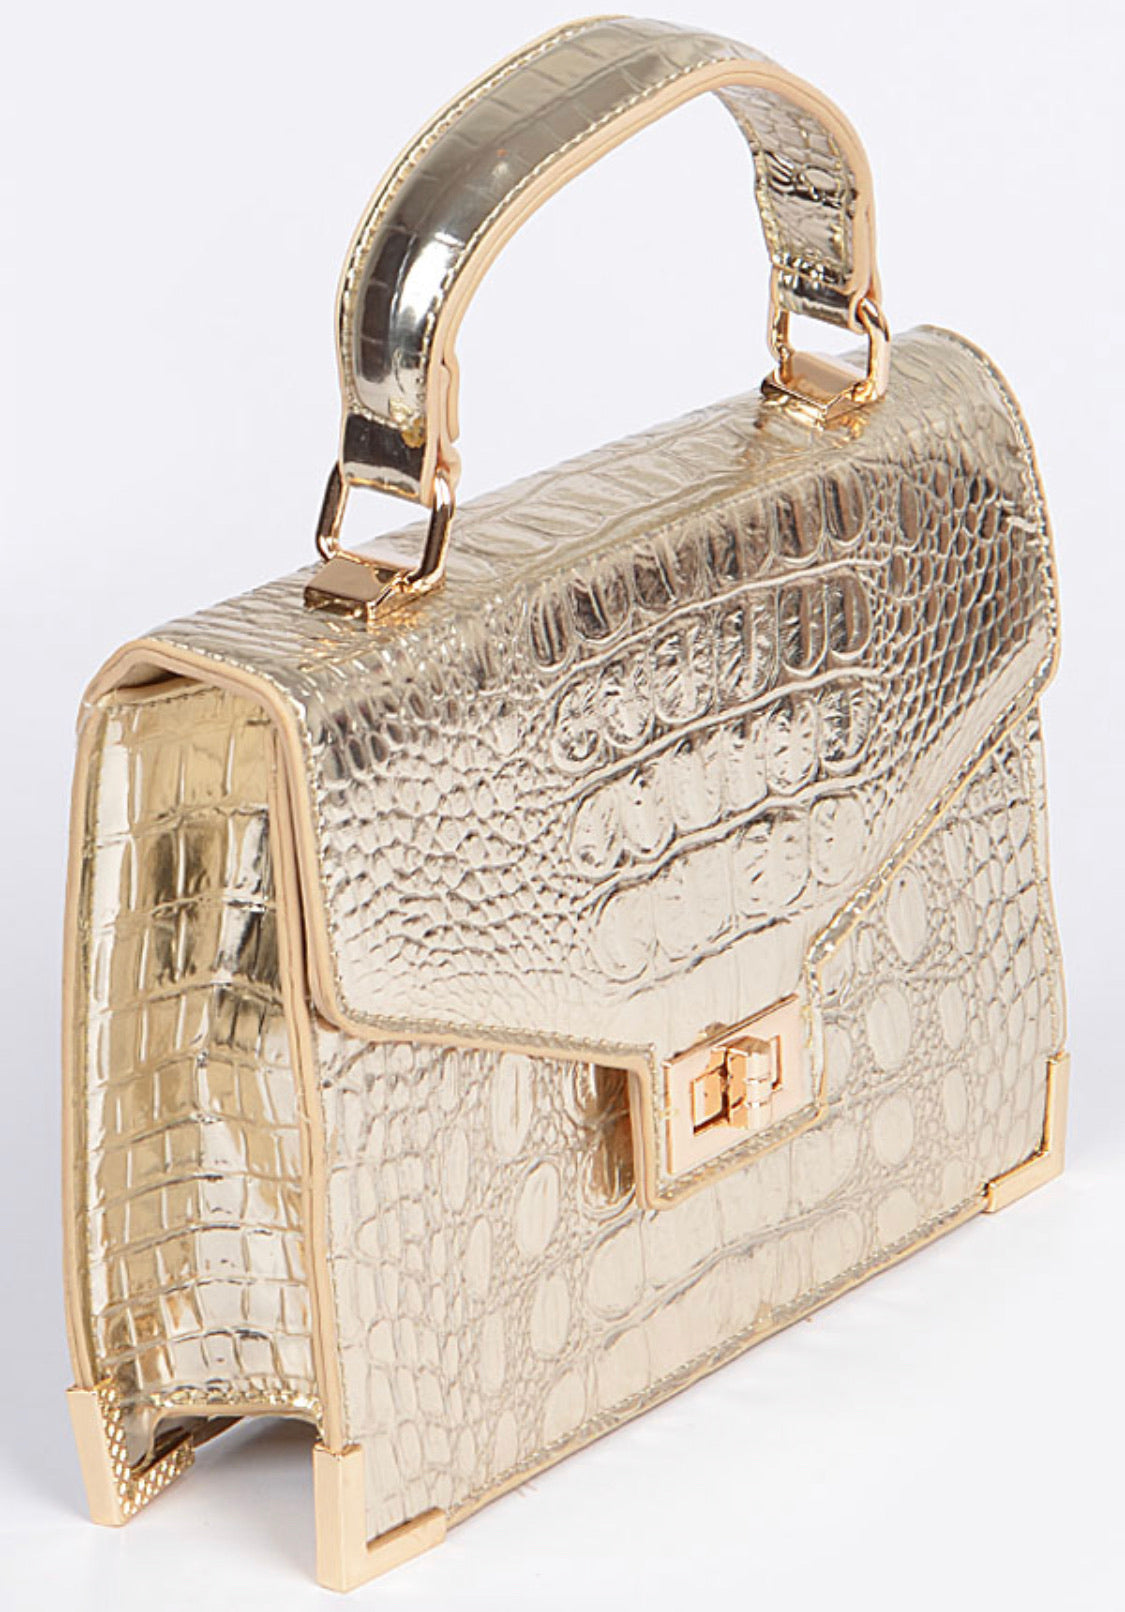 Final Sale Plus Size Patent Leather Purse in Silver or Gold Crocodile